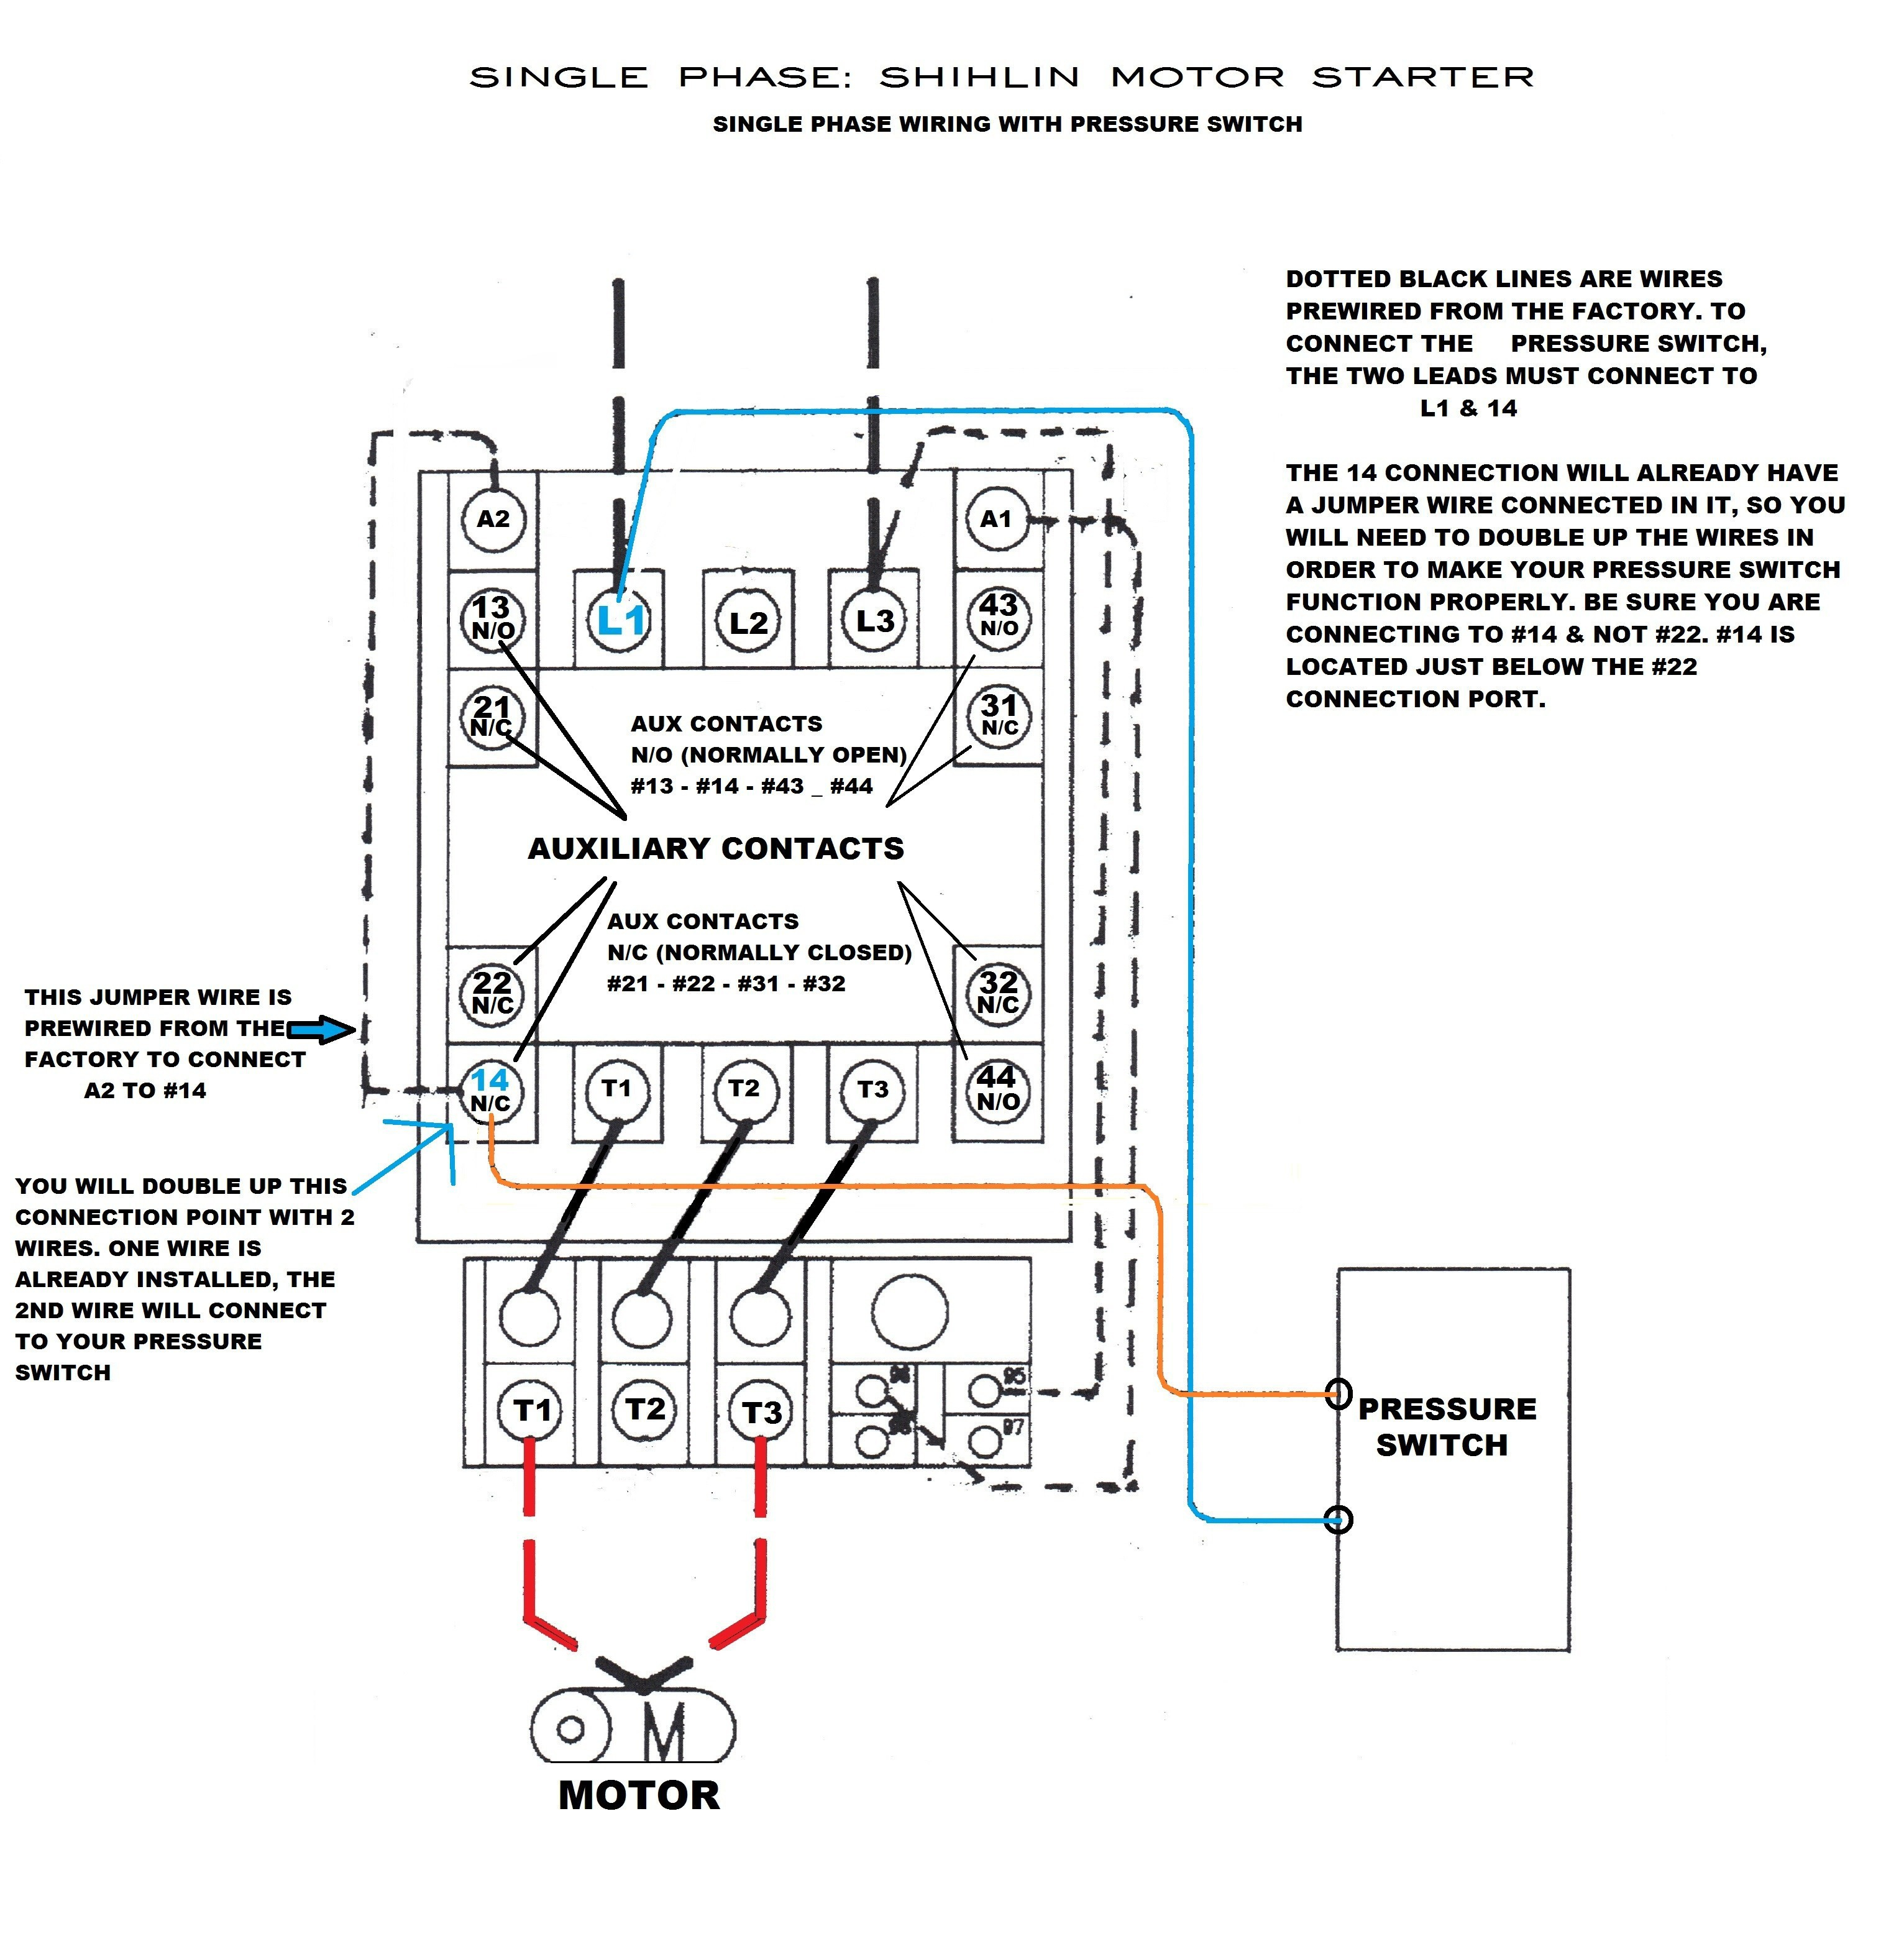 Square D Motor Downloads Wiring Diagram For Magnetic Starter Copy - Magnetic Starter Wiring Diagram